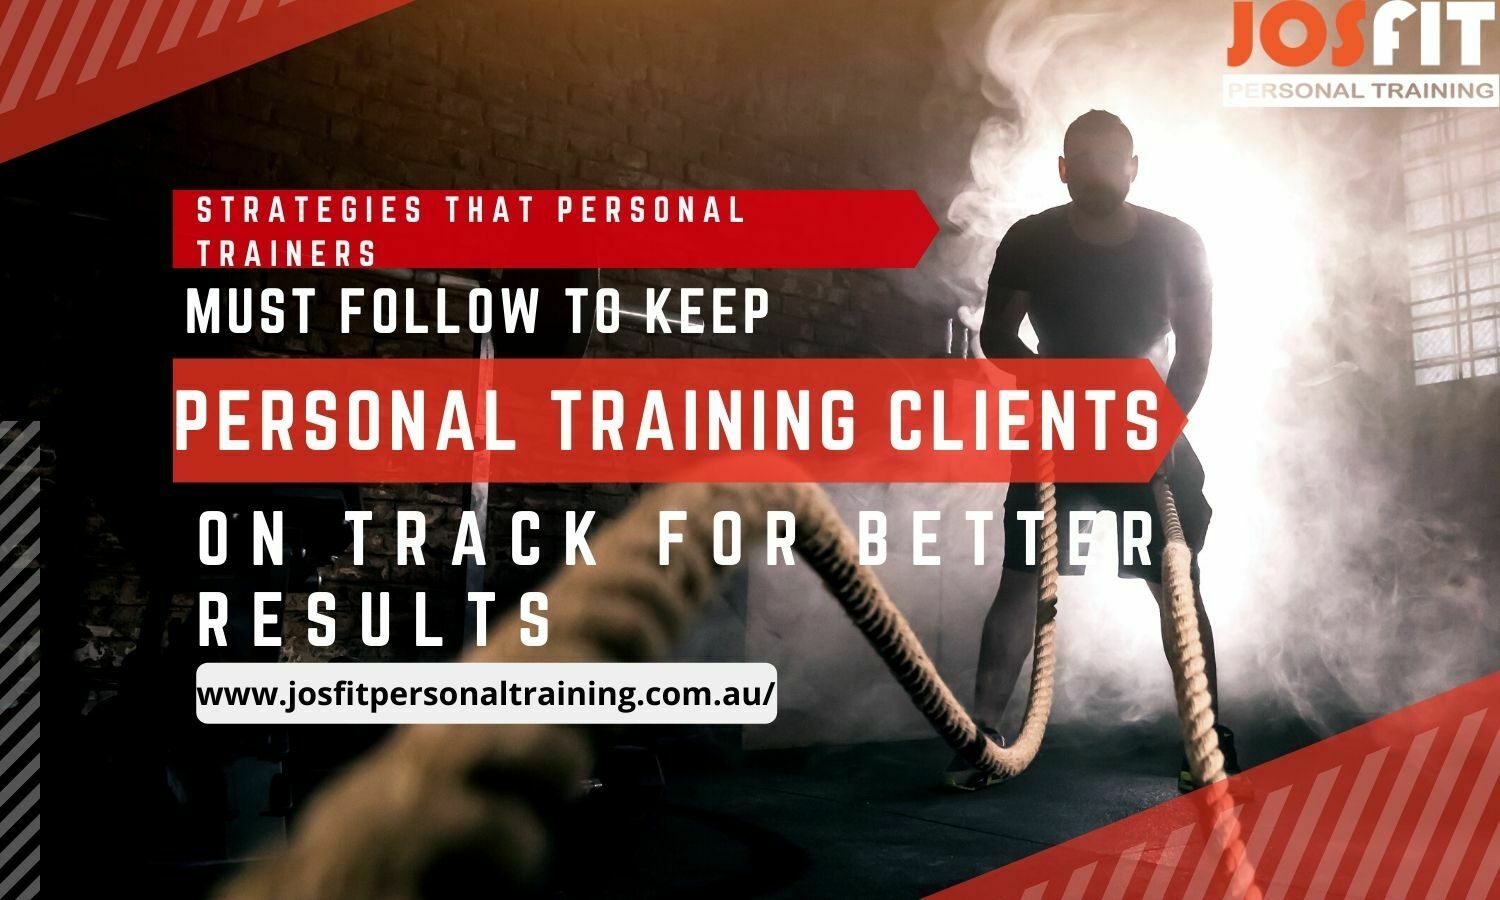 Strategies that personal trainers must follow to keep Personal Training Clients on Track for Better Results